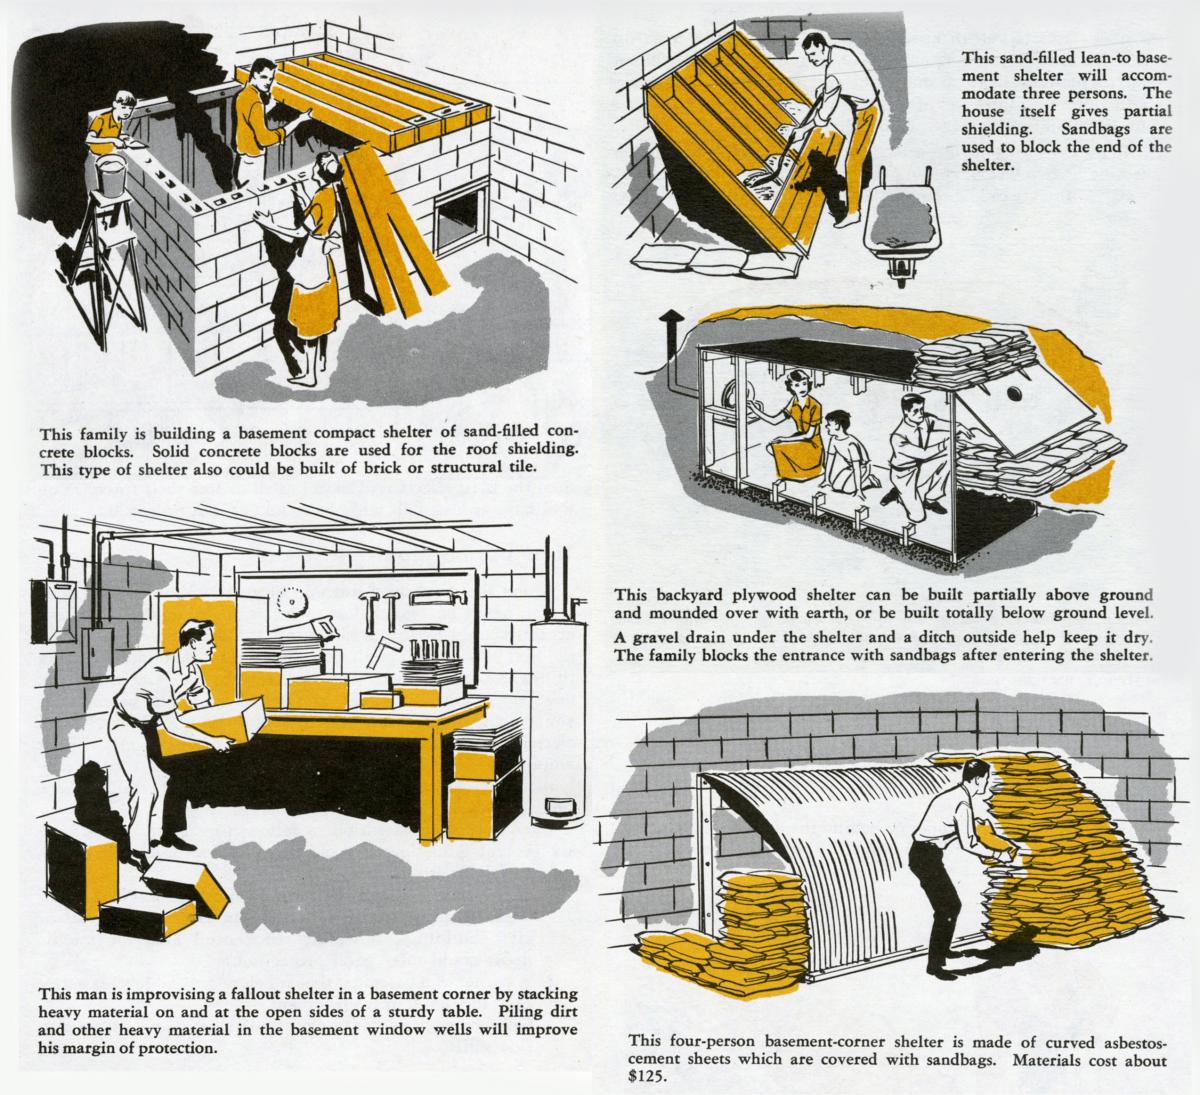 Fallout shelter ideas from the Office of Civil Defense